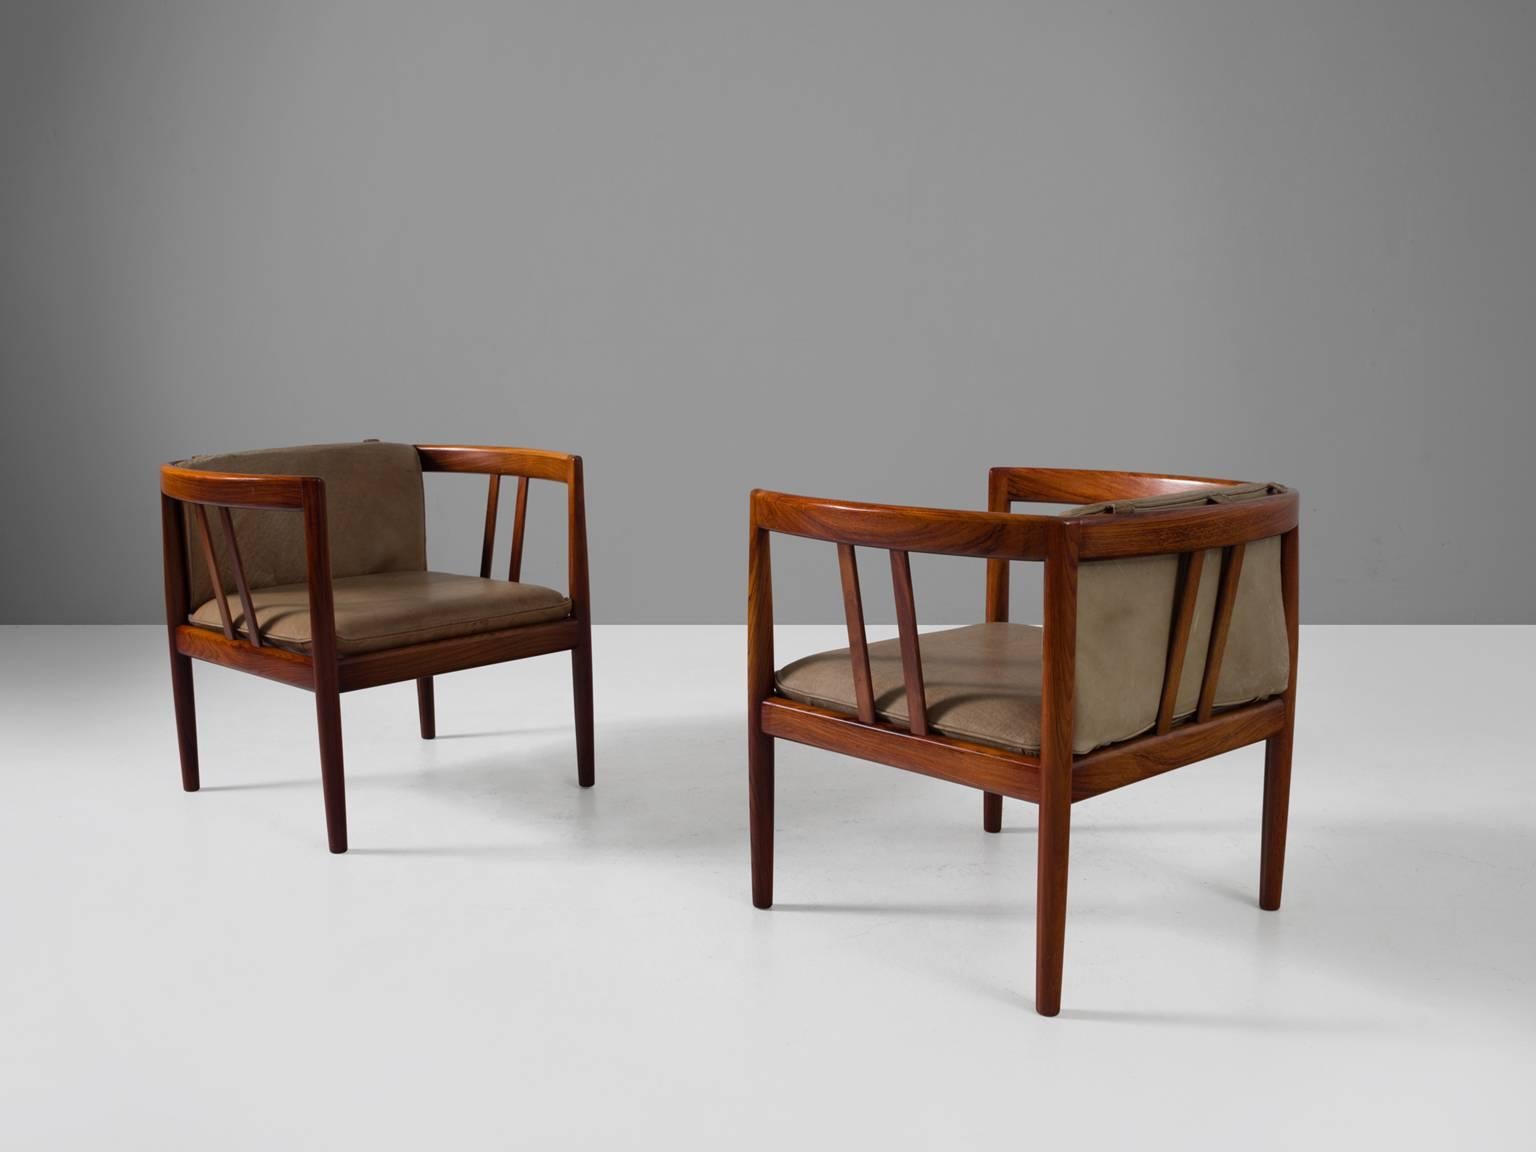 Set of two armchairs, in rosewood and leather by Illum Wikkelsø for Holger Christiansen, Denmark before 1964. 

A great looking pair of rosewood club chairs designed by Danish designer Illum Wikkelsø. These chairs, produced by Holger Christiansen